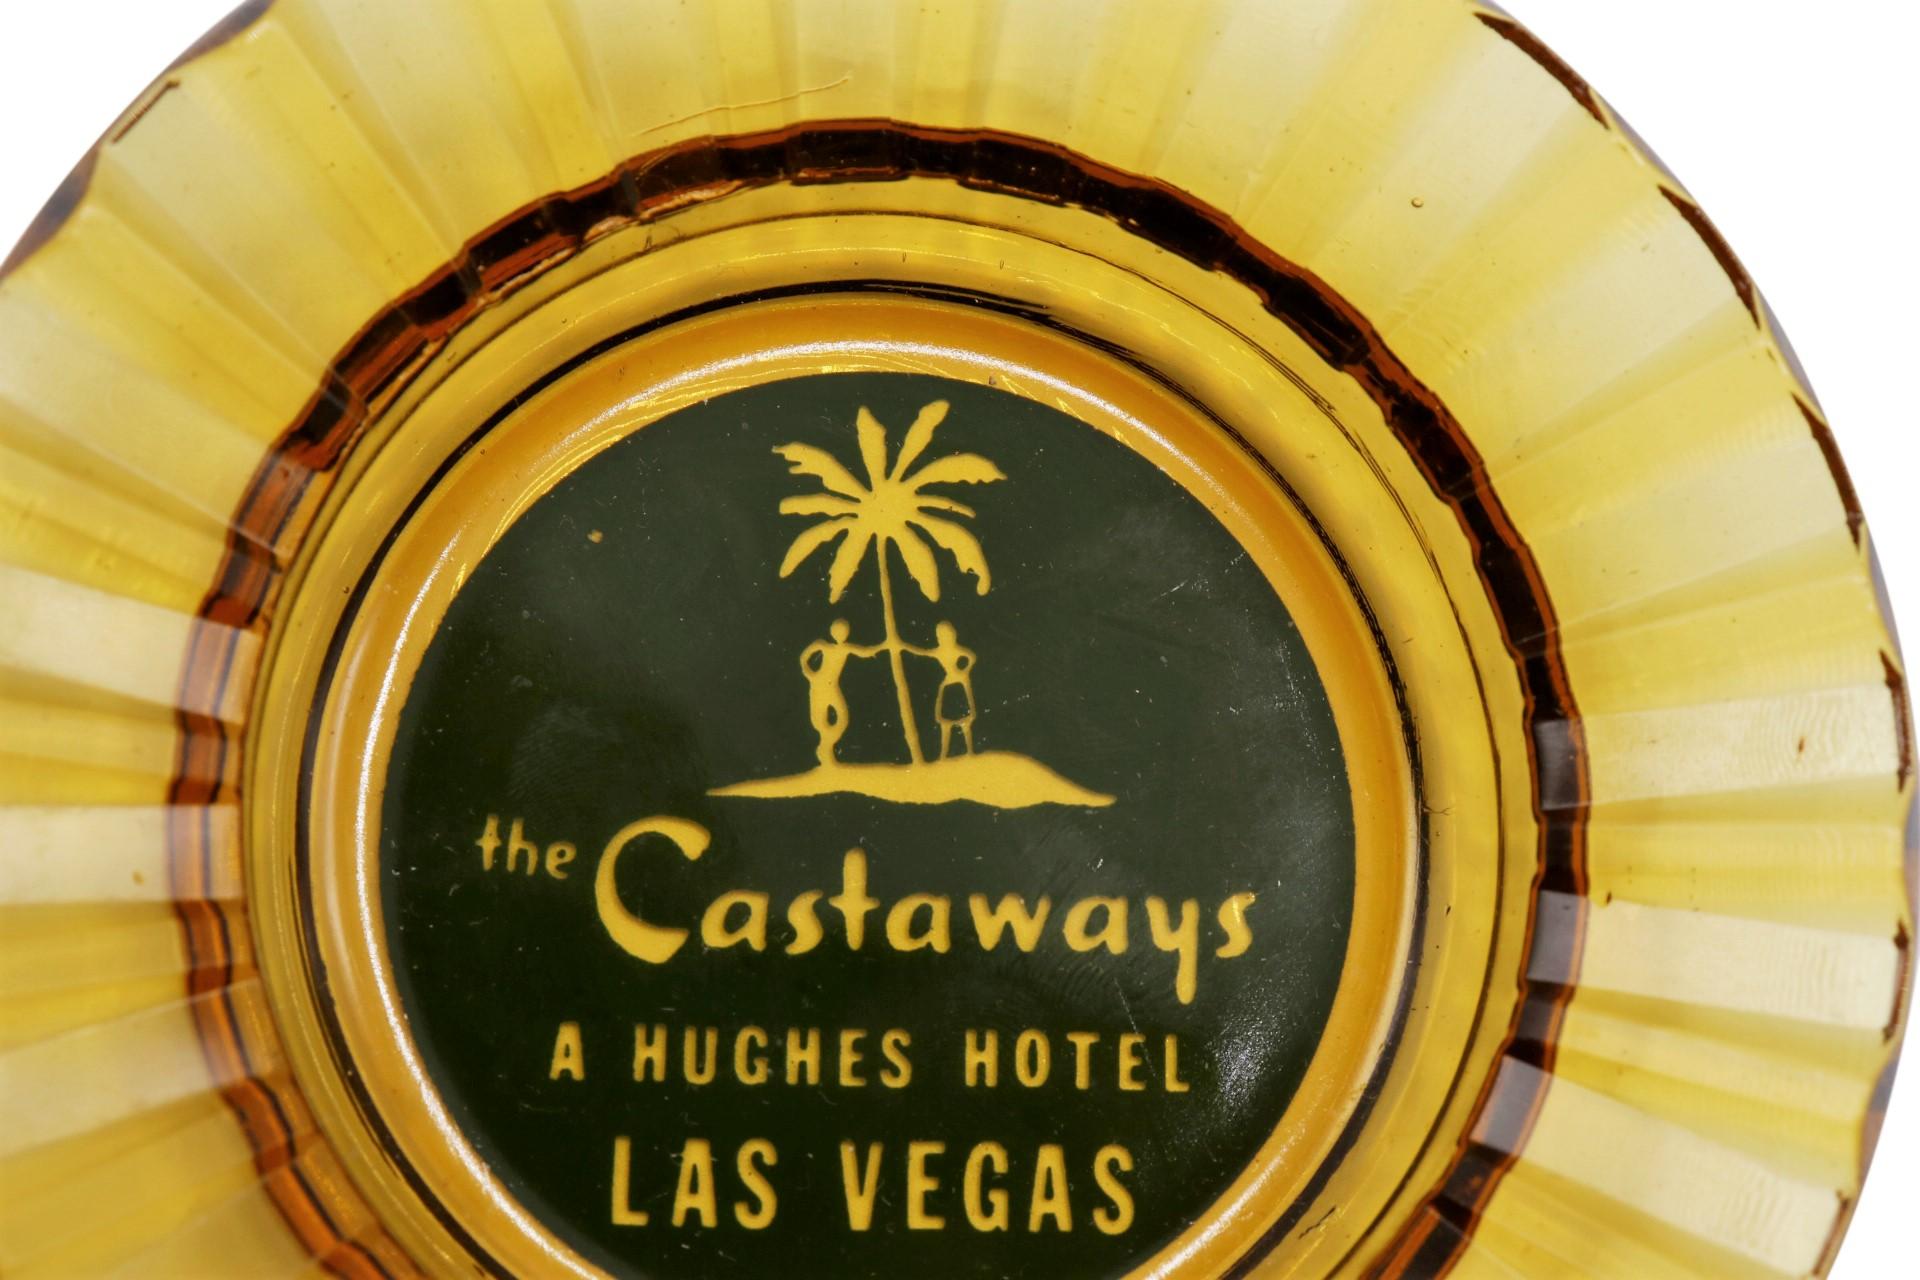 A yellow tinted glass ashtray from The Castaways Hotel, a hotel and casino in Paradise, Las Vegas, Nevada. The center is printed with a green circle branded with the Castaways logo. The hotel was opened in 1963, purchased in 1967 by billionaire